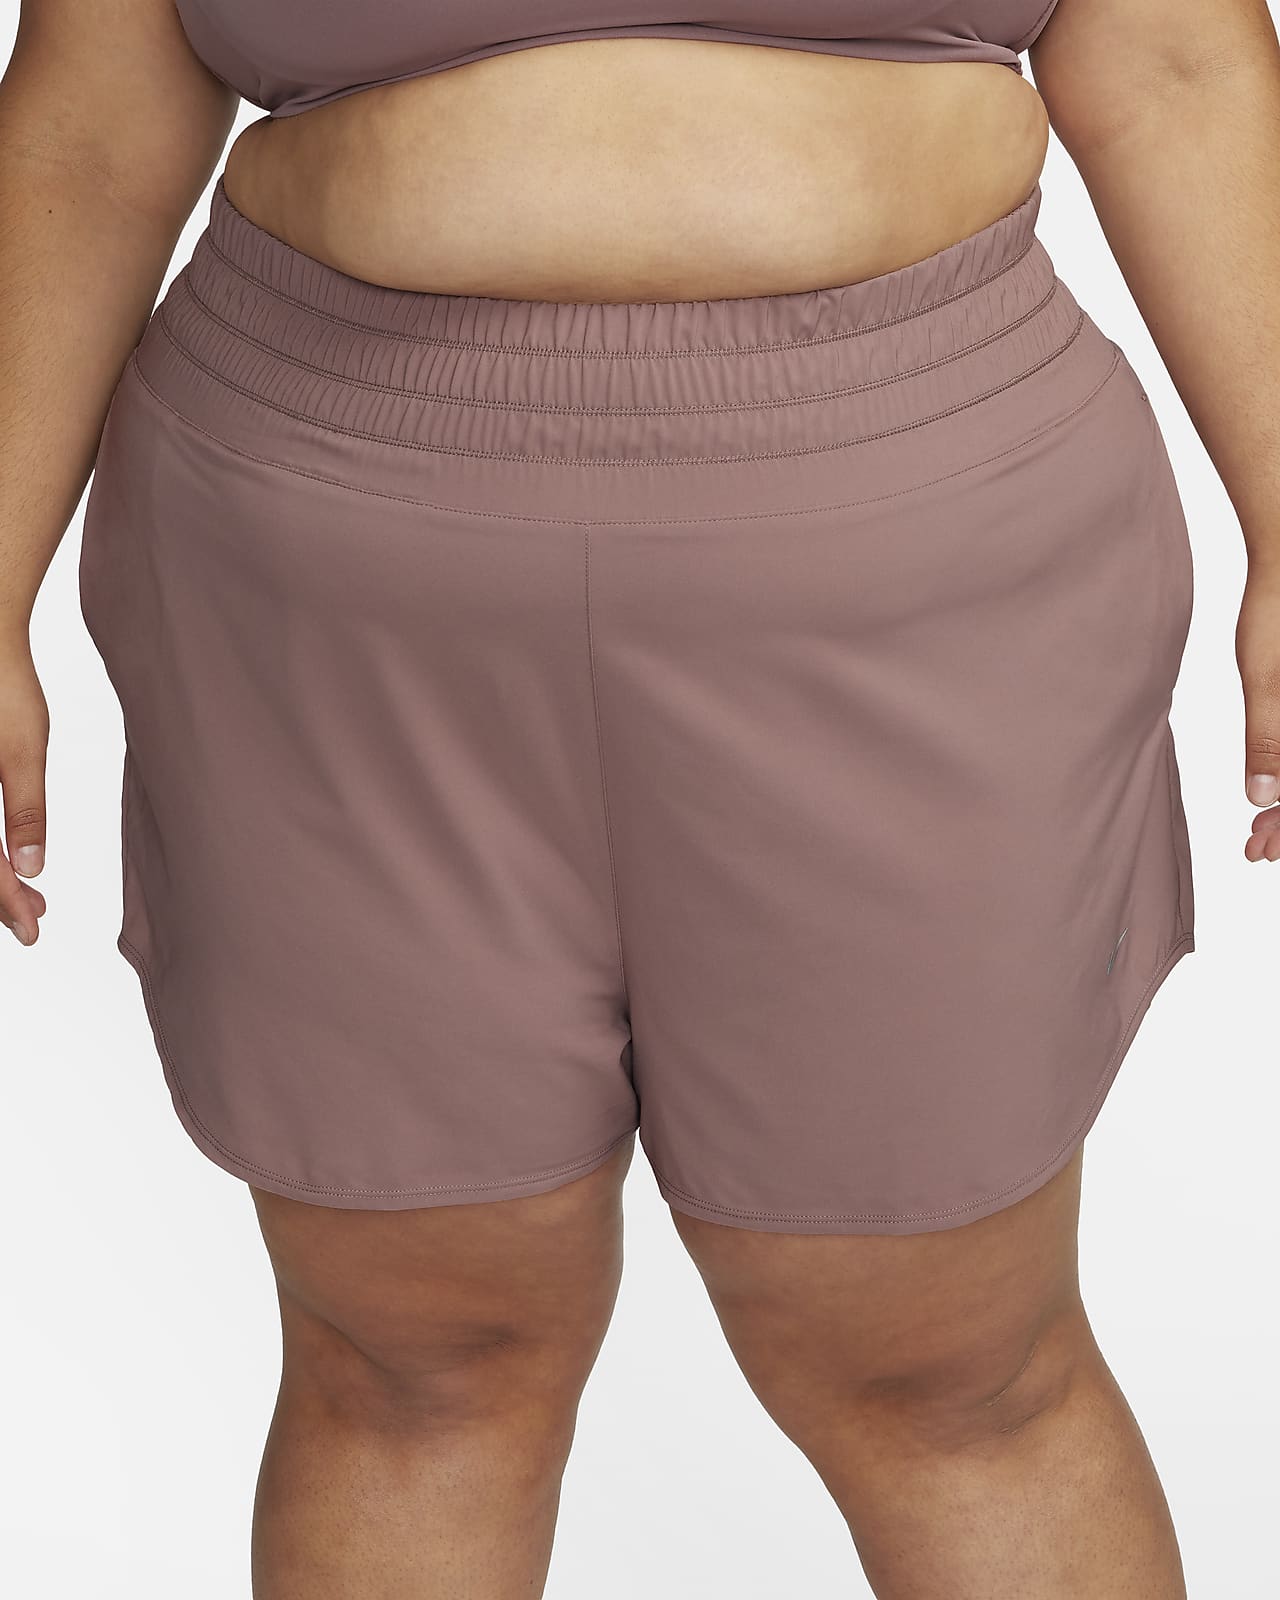 CLOSEOUT CLEARANCE! Plus Size High Waist Solid Color Poly/Cotton